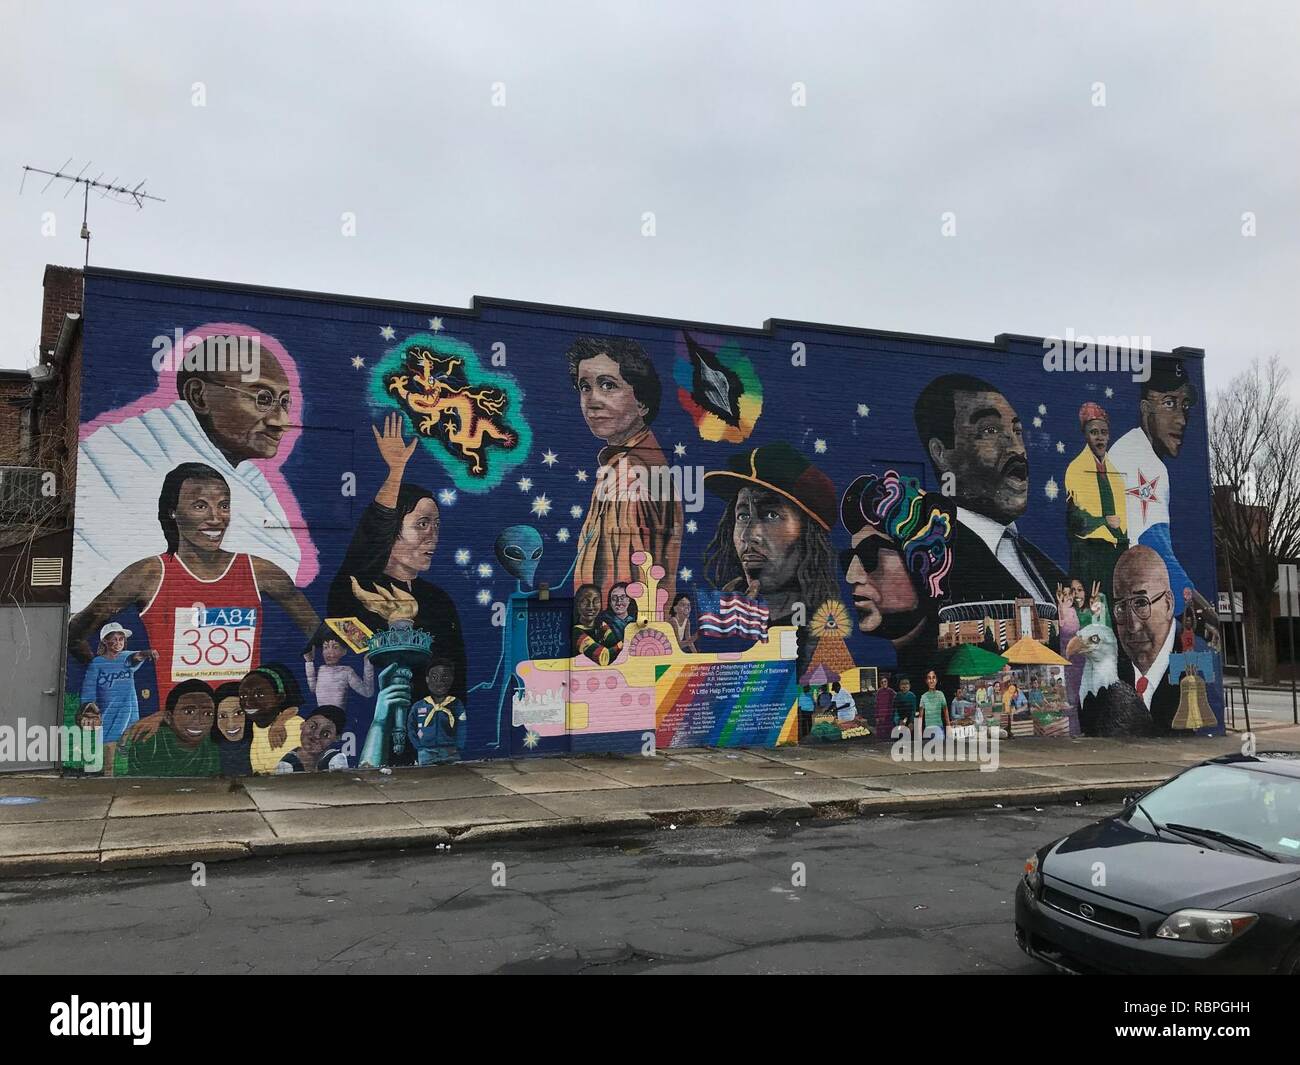 ‘A Little Help From Our Friends‘ (1966; Robert Hieronimus, muralist), Venable Avenue and Greenmount Avenue (southeast corner), Baltimore, MD 21218 (38847956870). Stock Photo